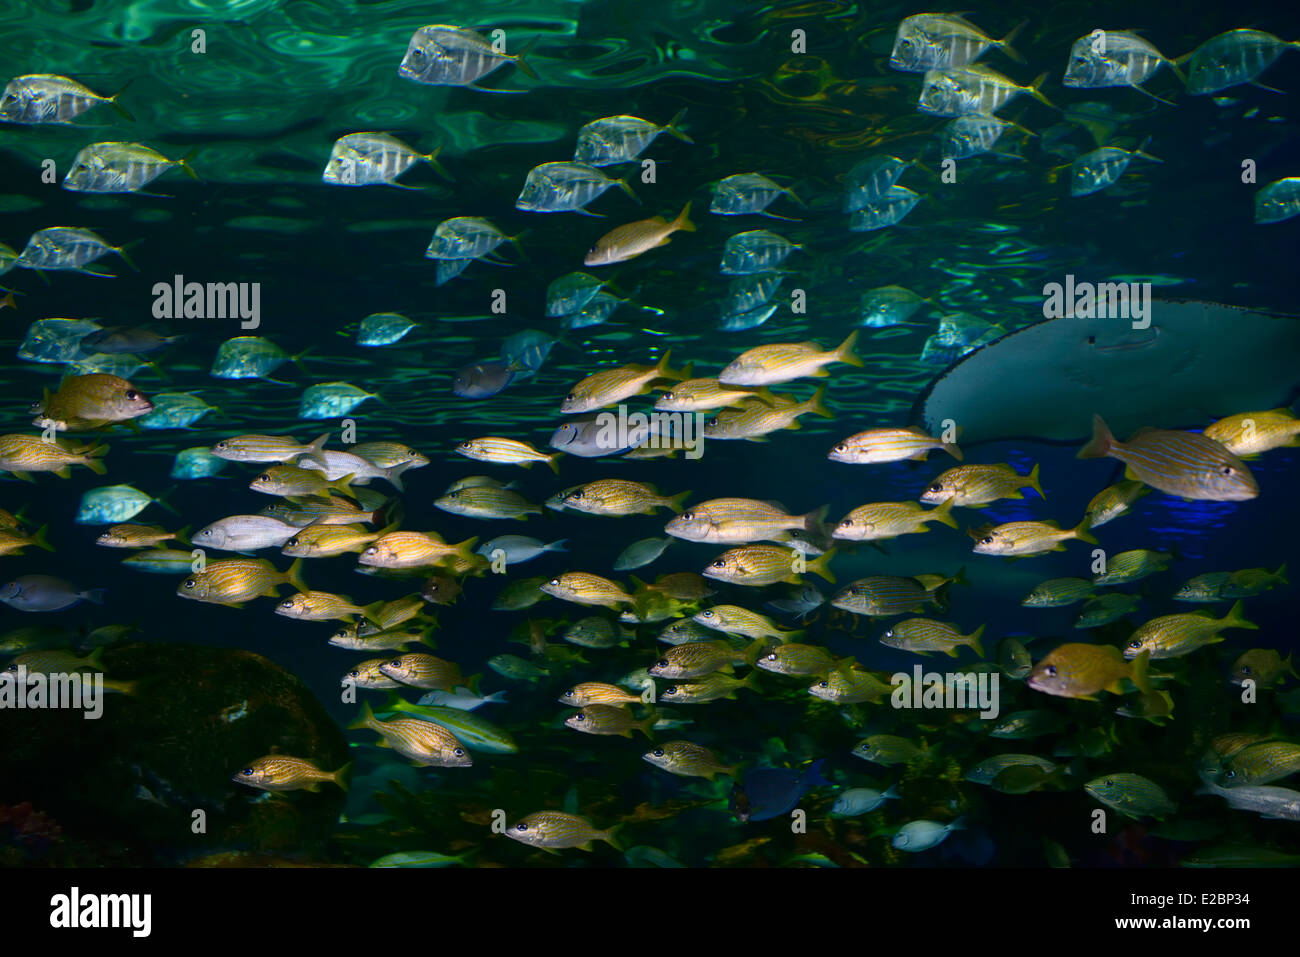 Shoals of French Grunt and Bluestripe Snappers with silver Lookdown Fish and Stingray Ripleys Aquarium Toronto Stock Photo